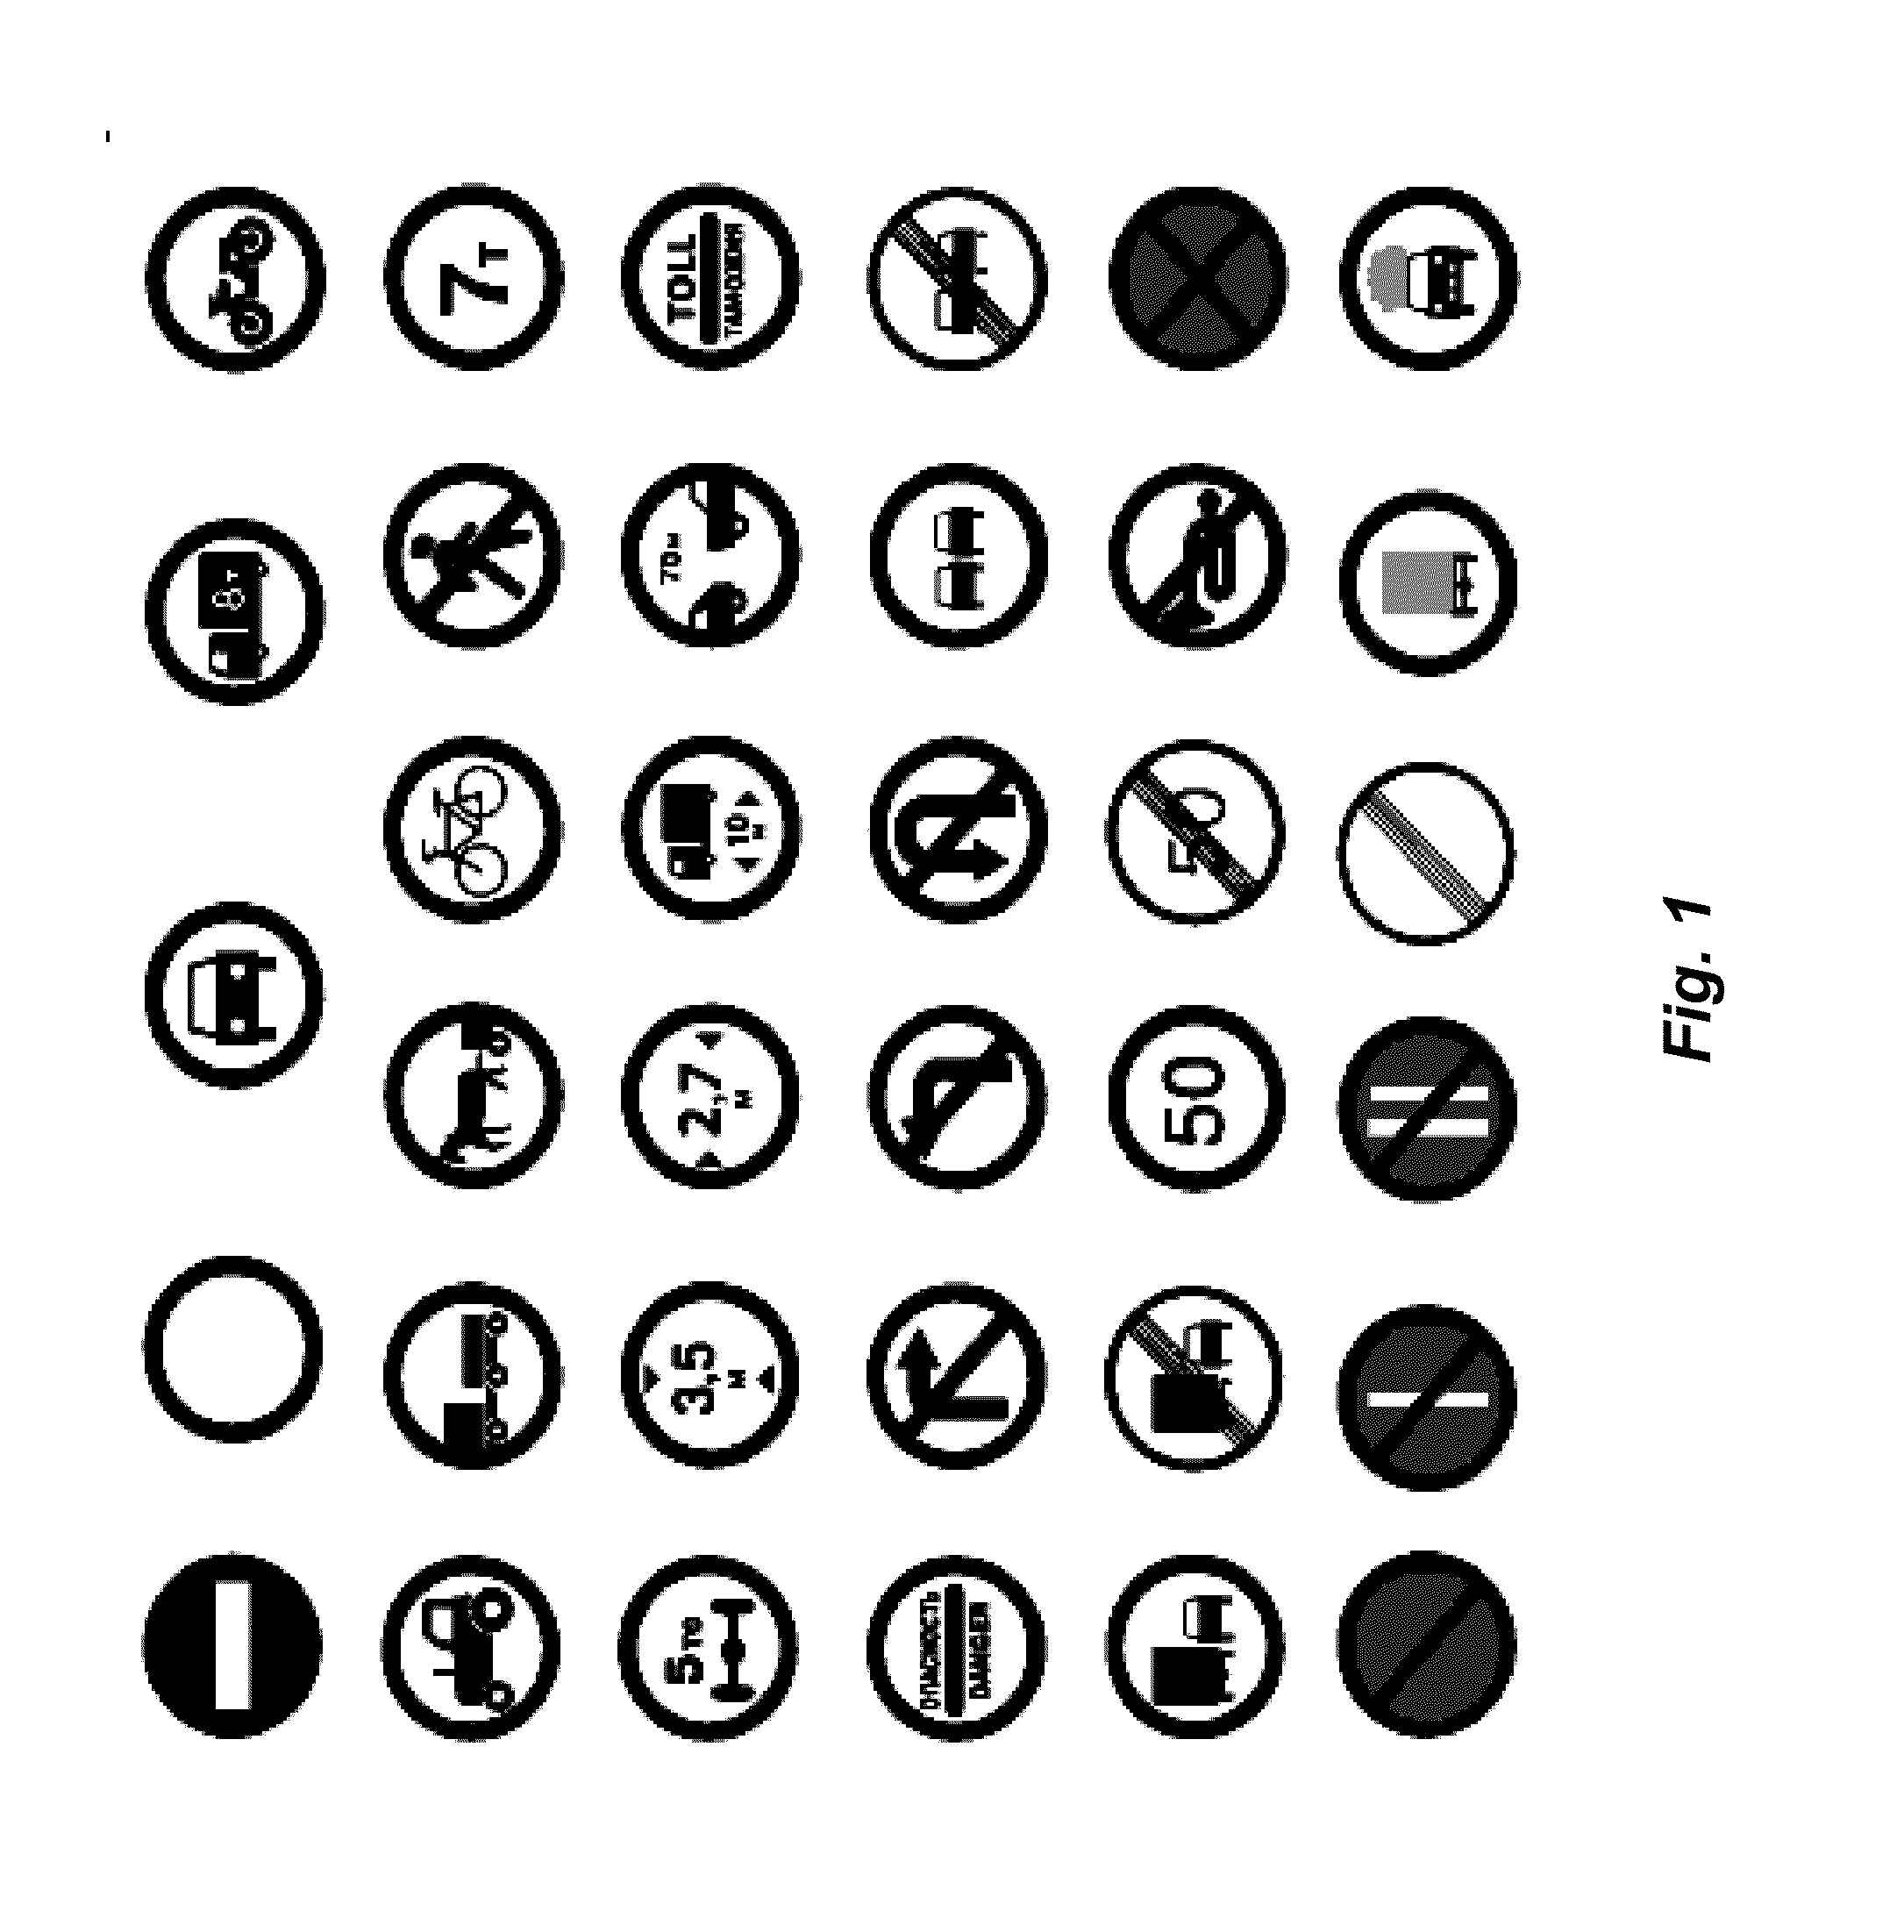 Method for Recognizing Traffic Signs